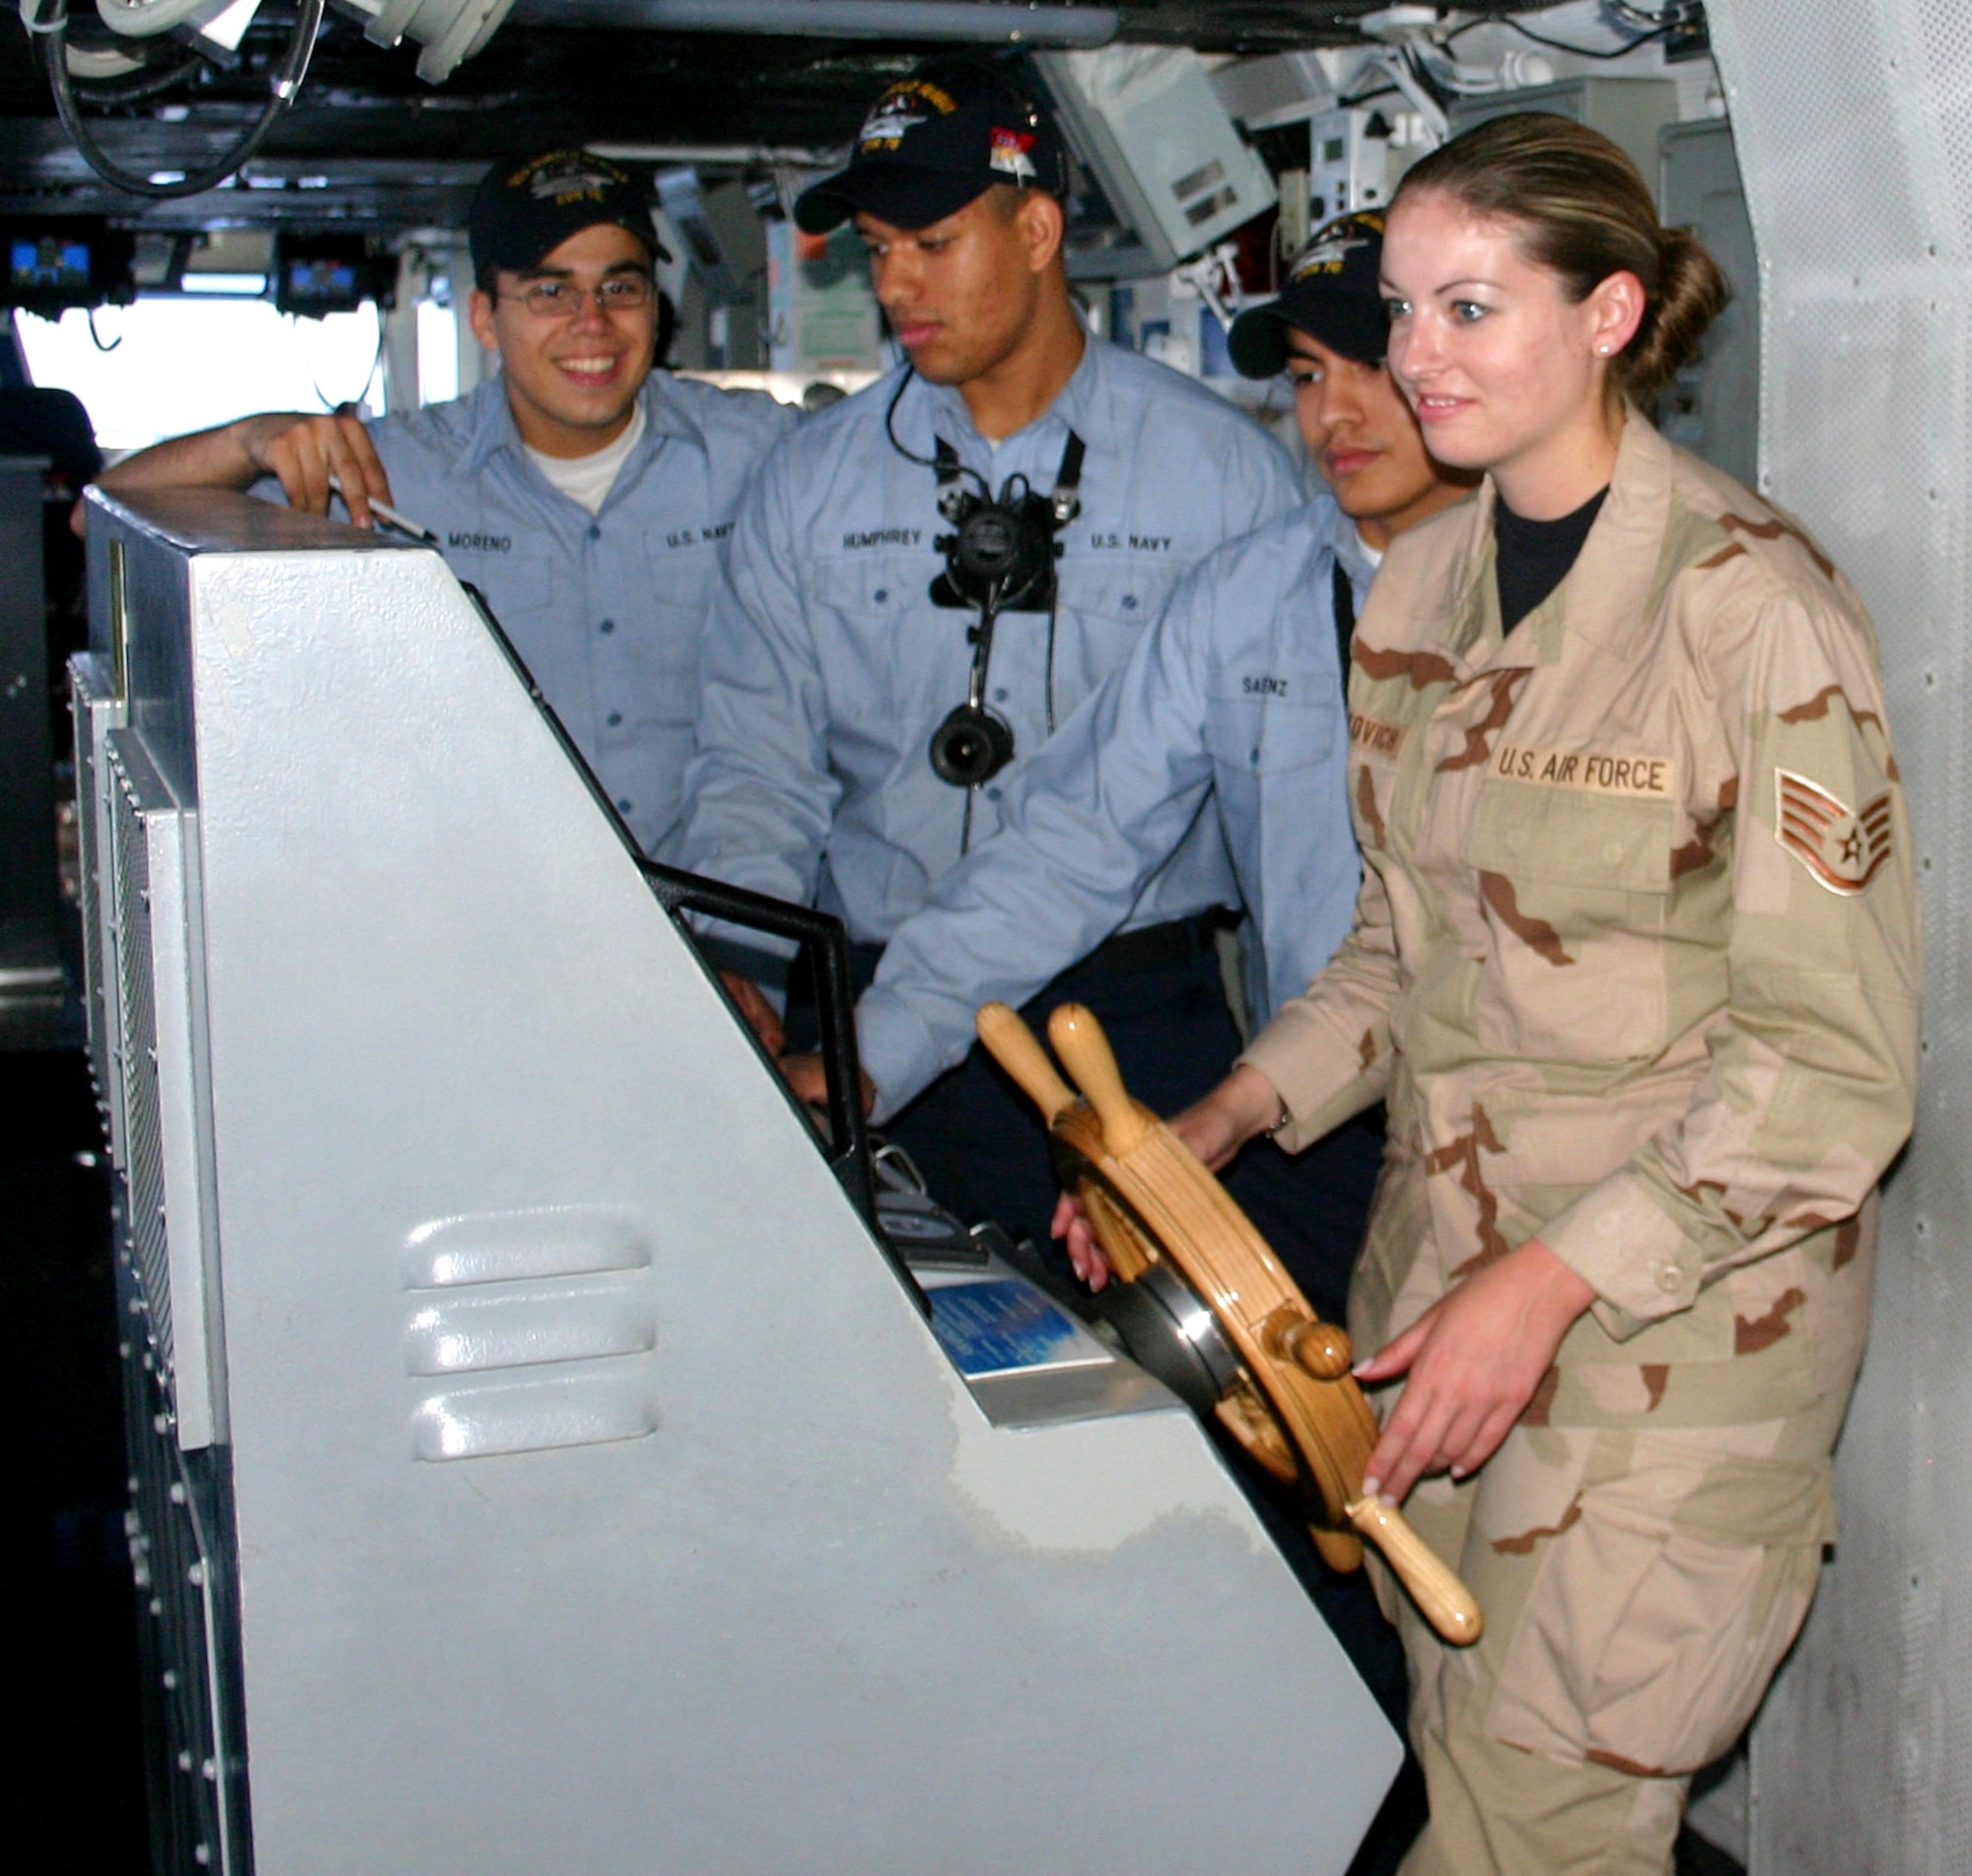 Sailors aboard the USS Ronald Reagan help Staff Sgt. Melissa Koskovich steer the ship 30 degrees to starboard during an orientation tour Thursday, March 30, 2006. Ten Airmen from Southwest Asia came aboard the ship for a two-day visit aimed at fostering joint relations throughout the area of operations. (U.S. Air Force photo/Master Sgt. Bruce Morrow)